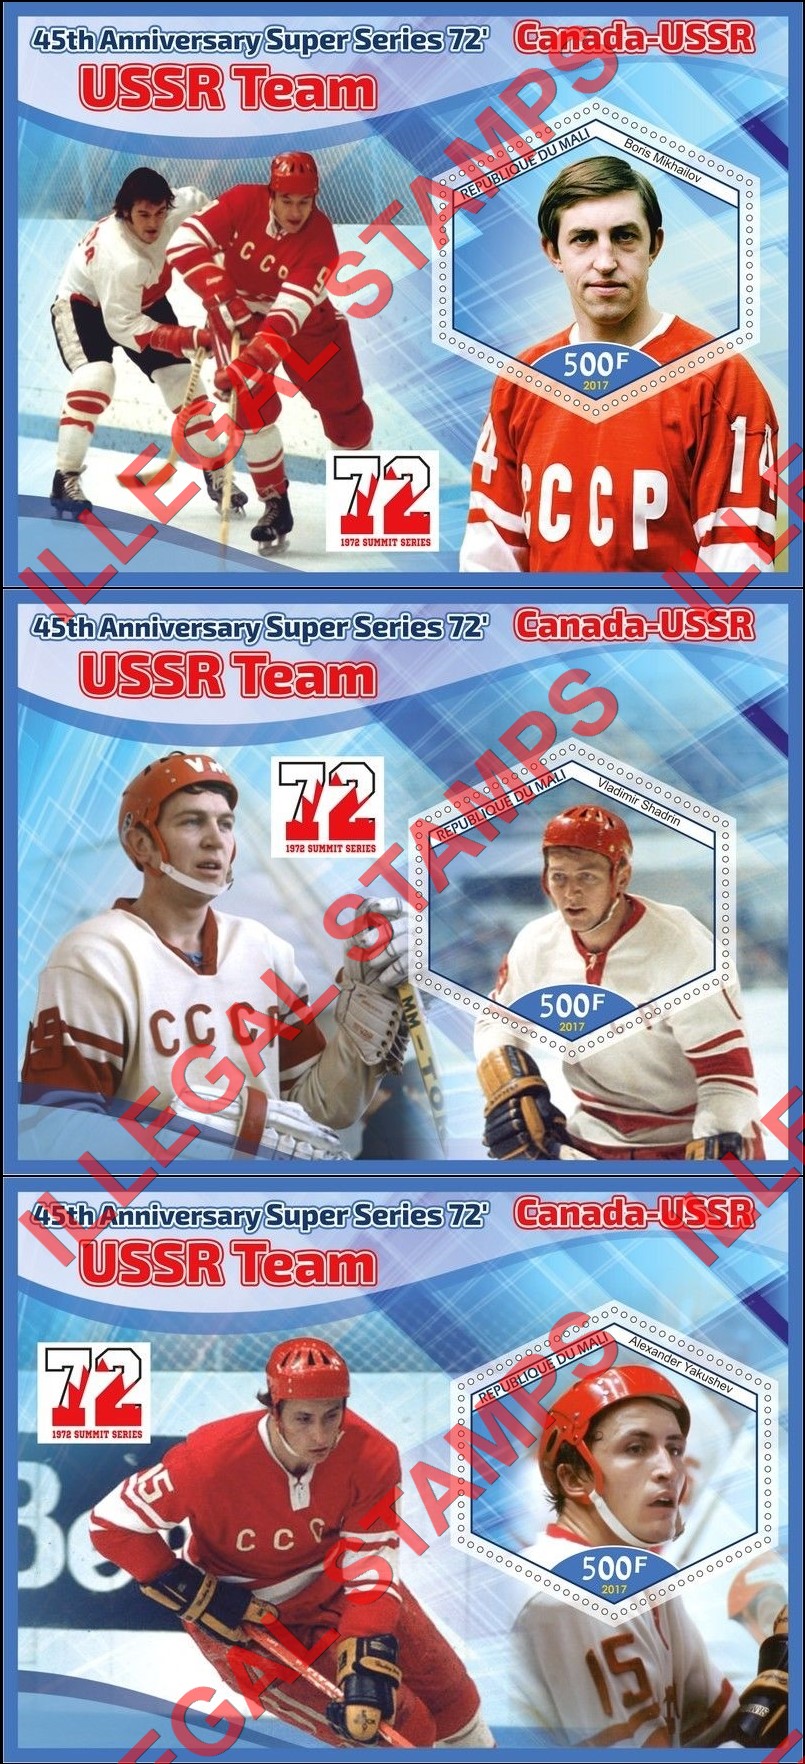 Mali 2017 Ice Hockey USSR Team Illegal Stamp Souvenir Sheets of 1 (Part 1)